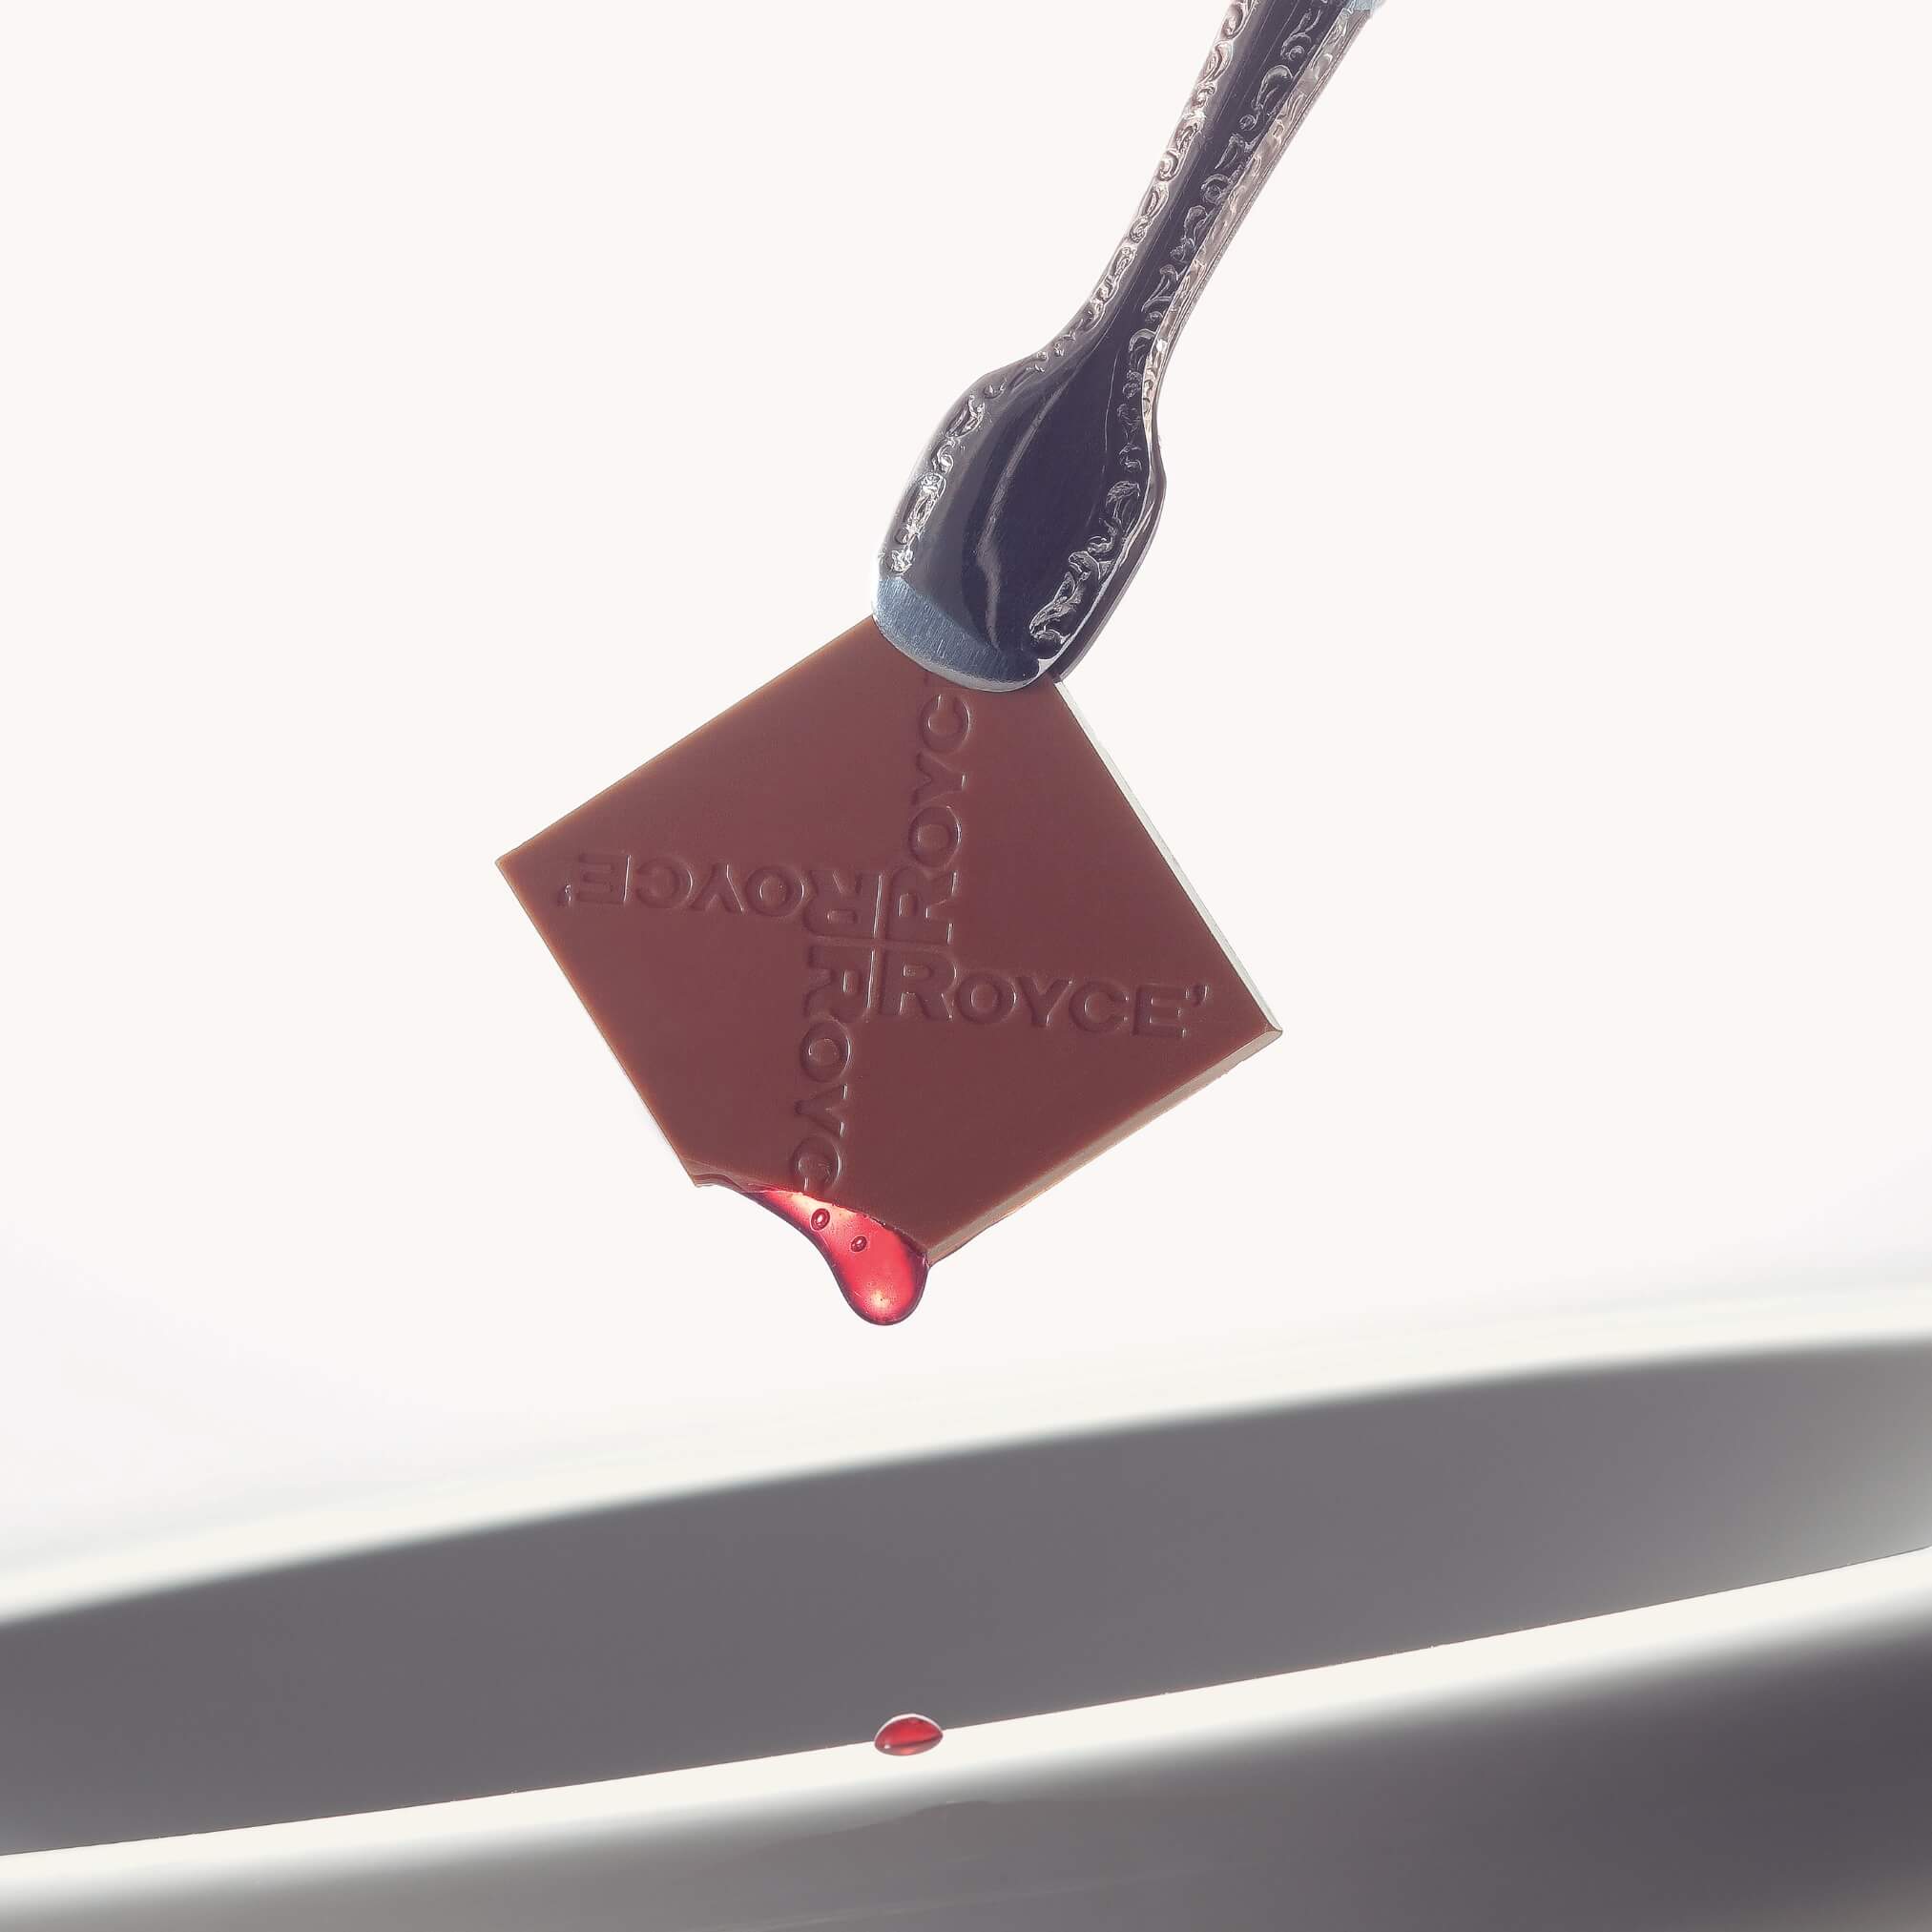 ROYCE' Chocolate - Prafeuille Chocolat "Berry Cube" - Image shows a silver tong holding a brown chocolate square with red sauce and engraved with the words "ROYCE'". Accents include a white plate-like surface. Background is in color white.